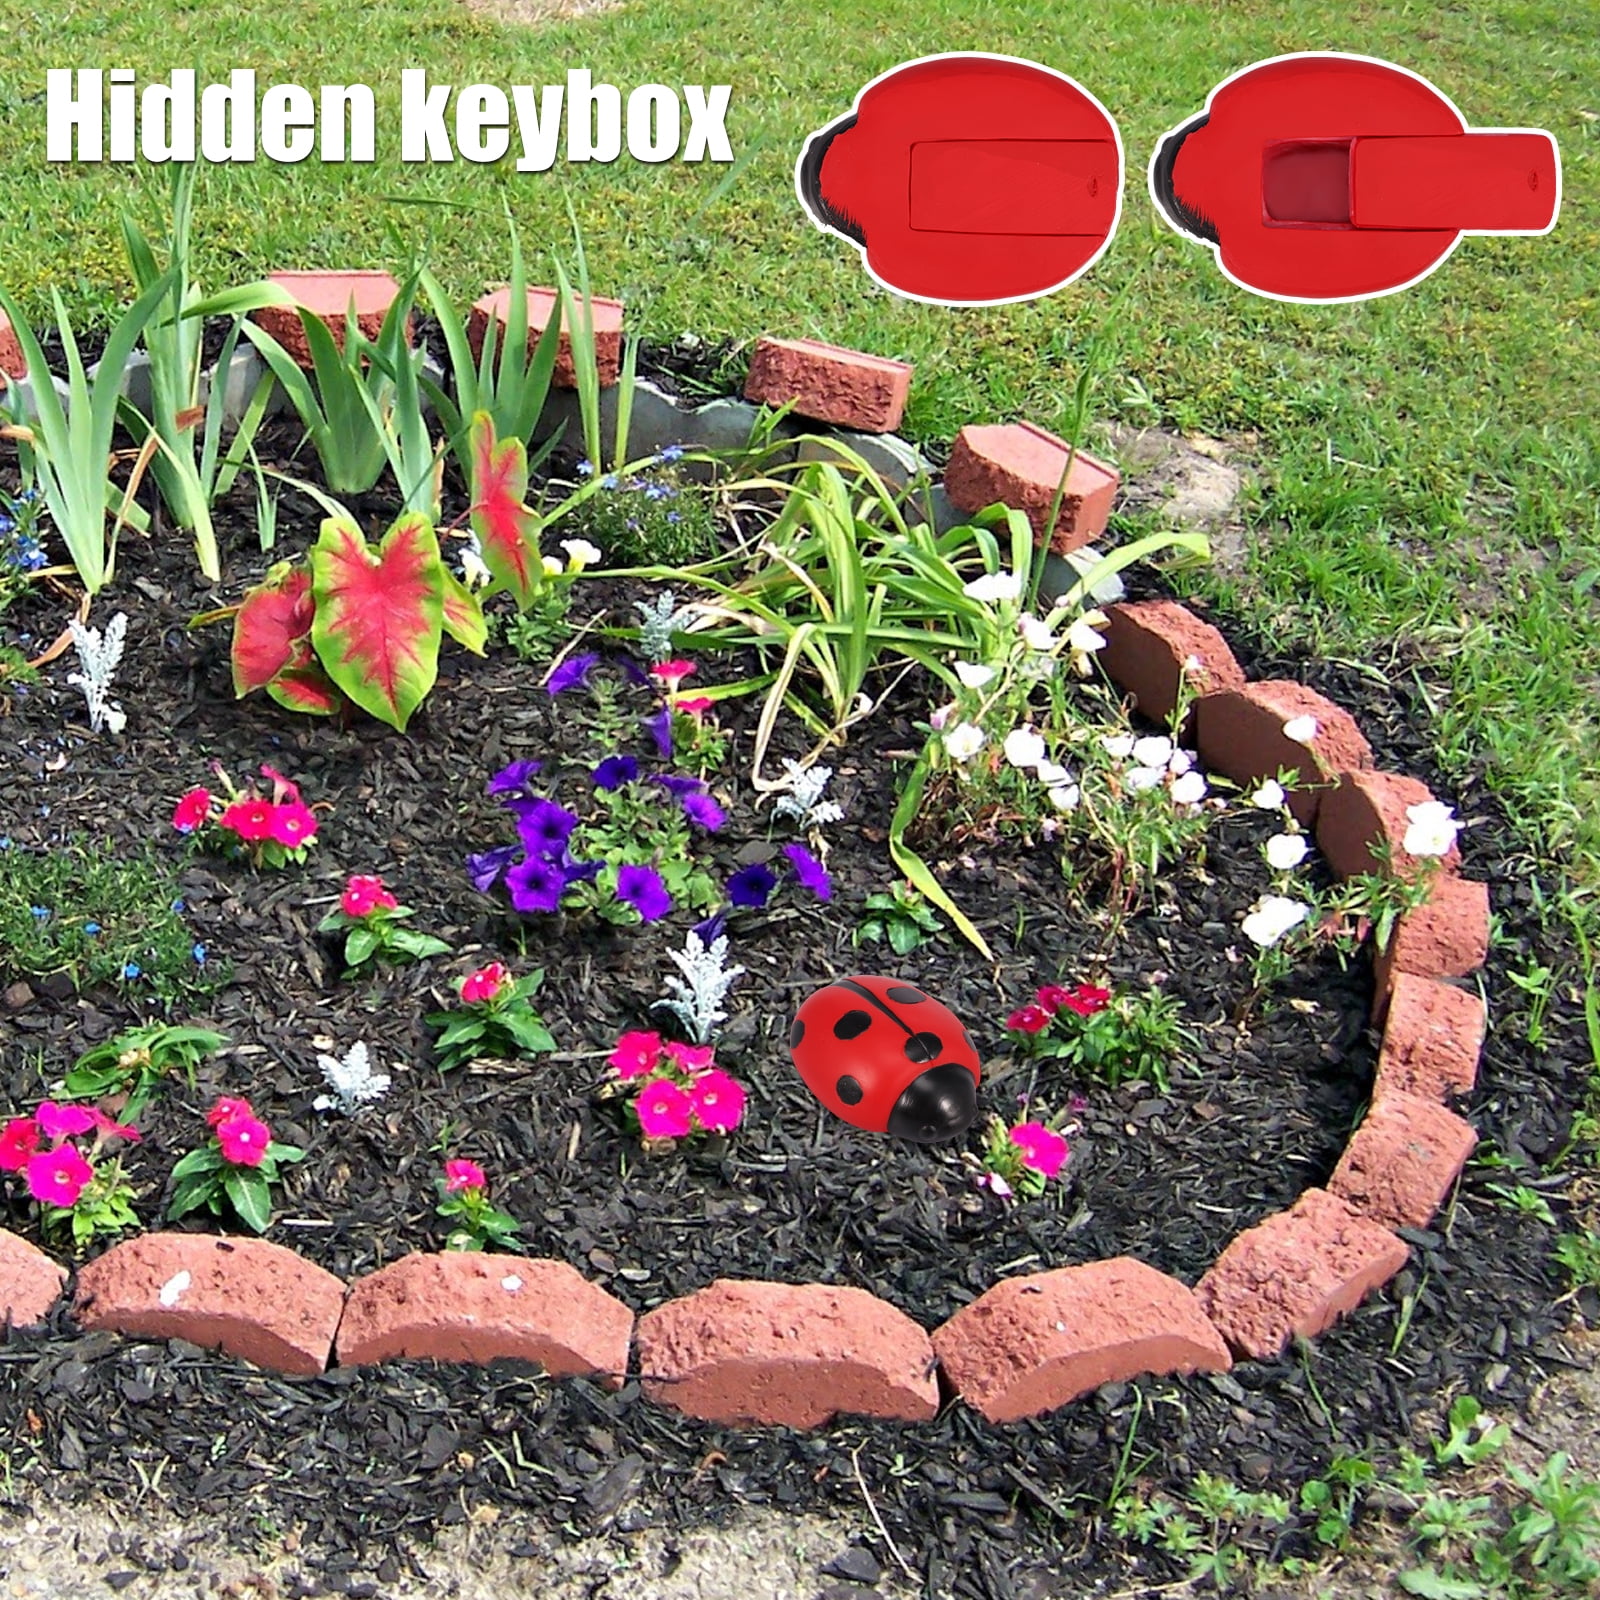 DAIHUI Fake Stone Shaped Key Box Hide Keys Protection Box For Outdoor  Garden Yard(Ink Color) on OnBuy